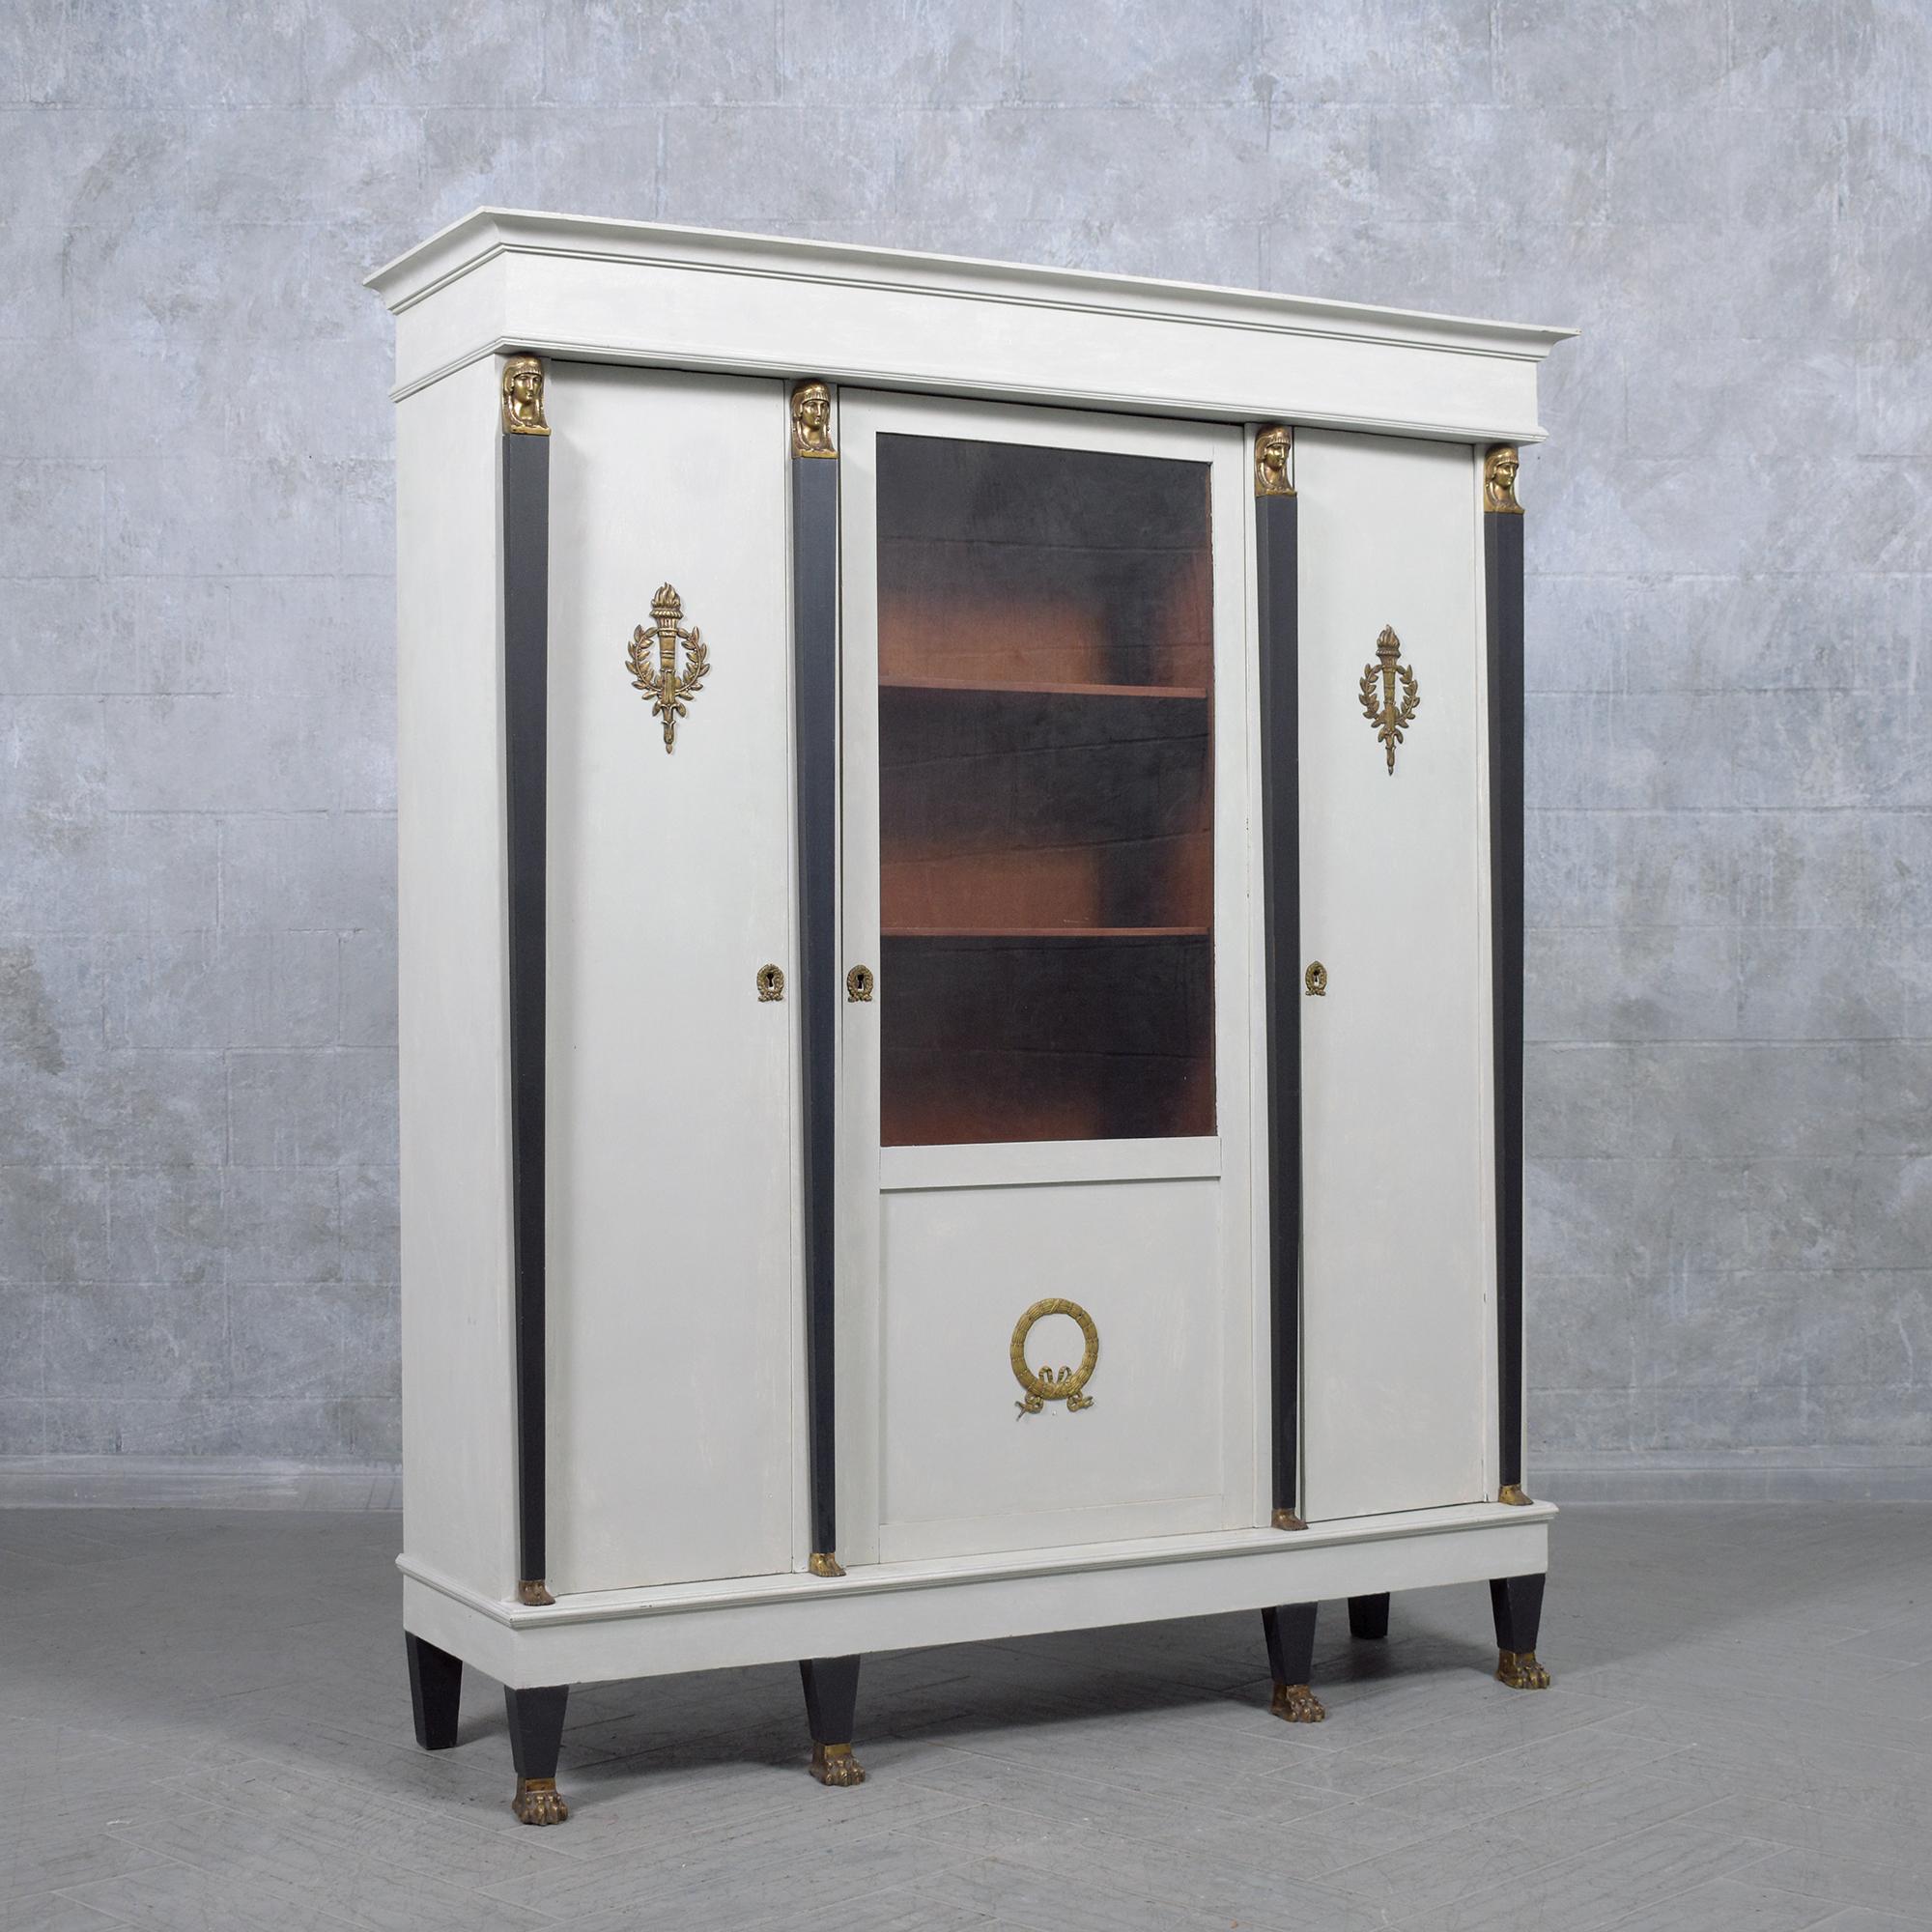 French Empire Bookcase: A Symphony of Mahogany, Brass, and Glass Elegance 5